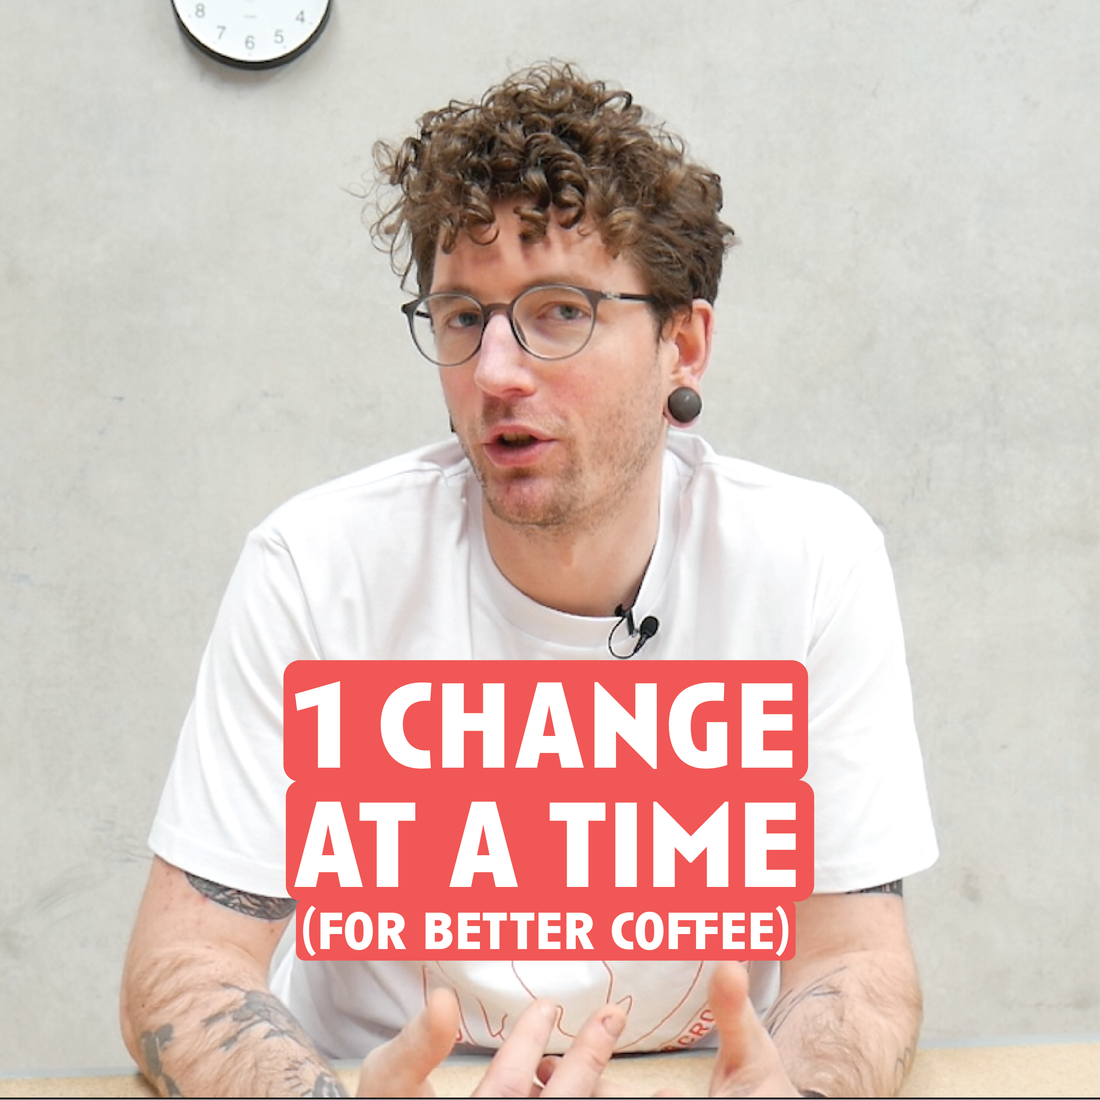 [Video Transcript] Coffee Tip #2: Small Changes for Better Coffee